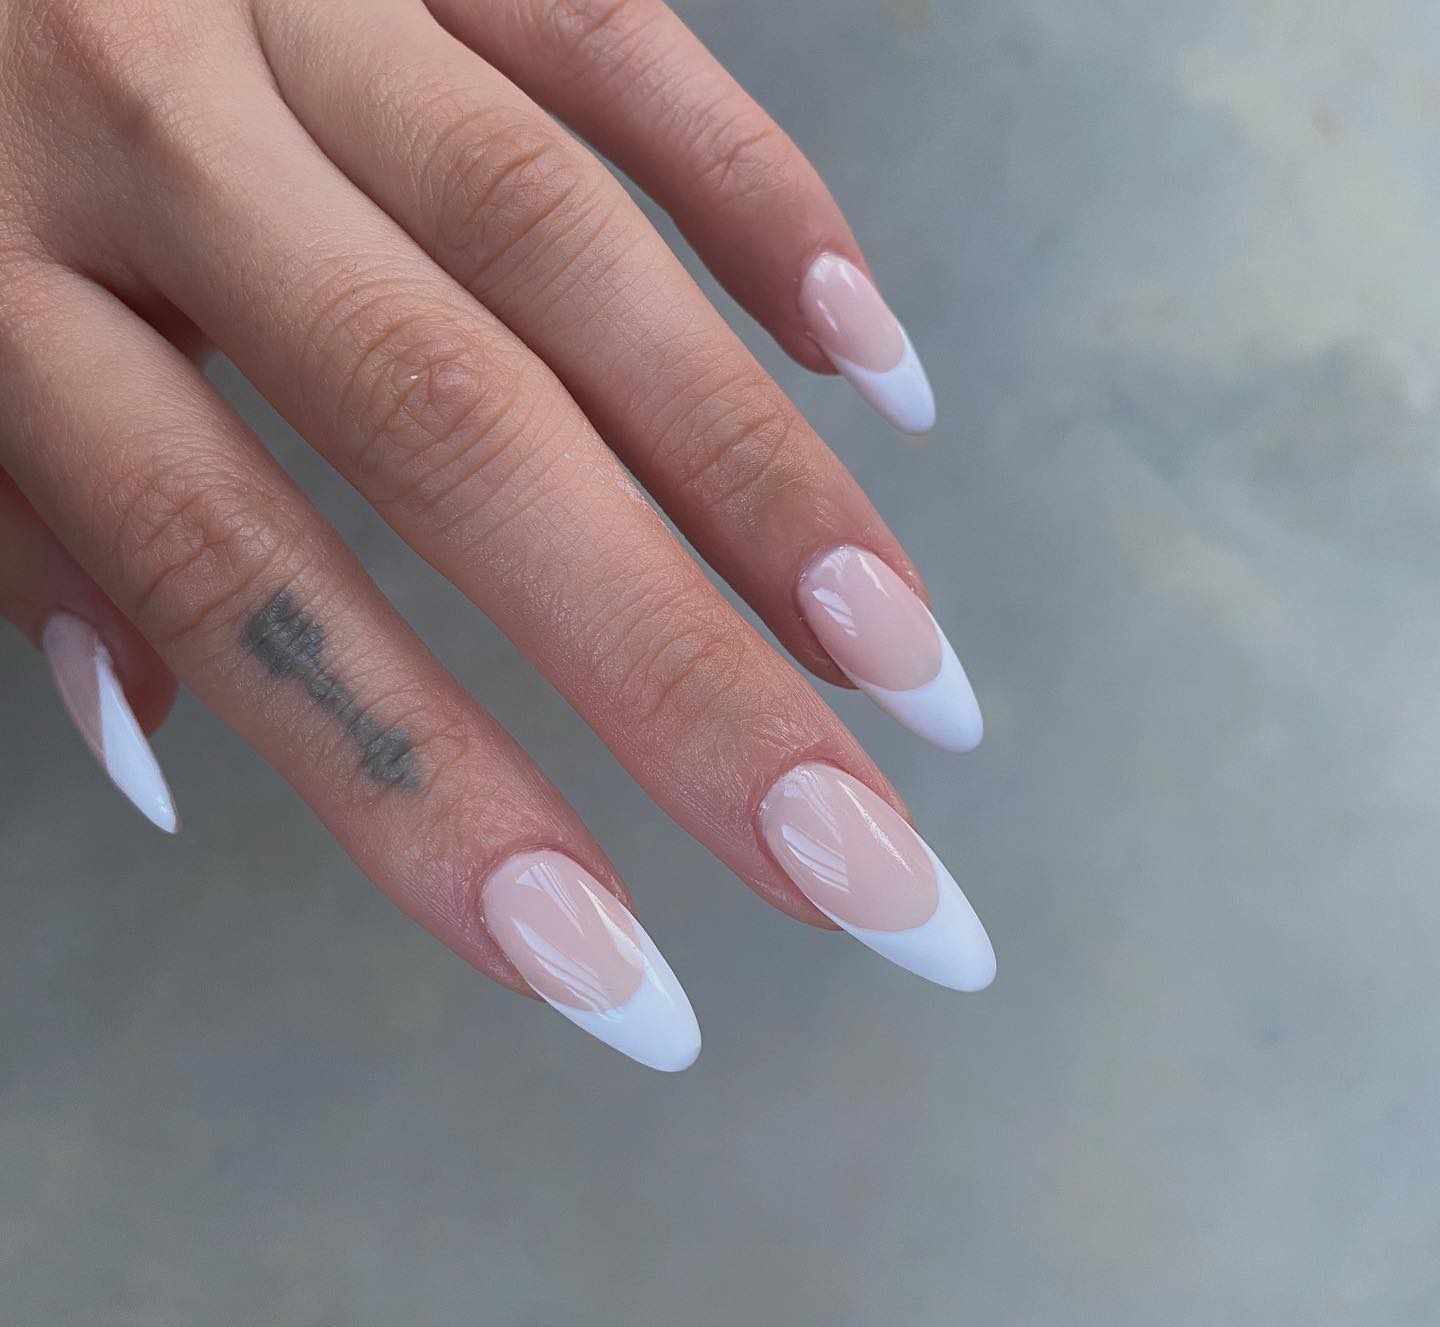 Deep French Tip Ideas That Deserve A Spot In Your Manicure Rotation